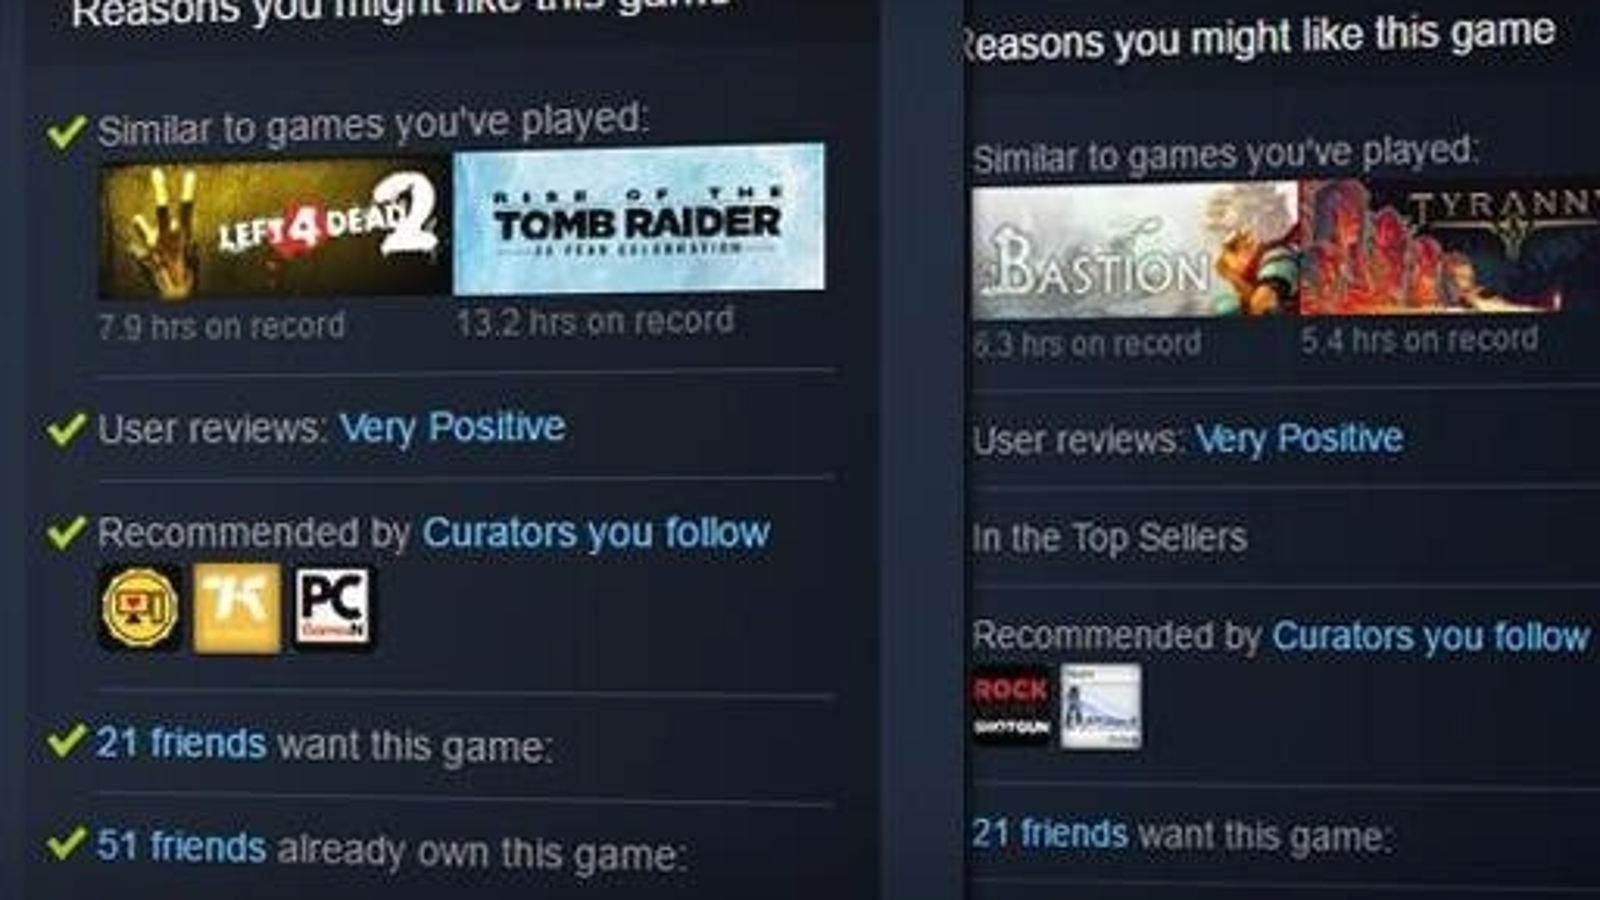 You want these games. Разум геймс. Steam Now owns. List of recommendations in Steam.